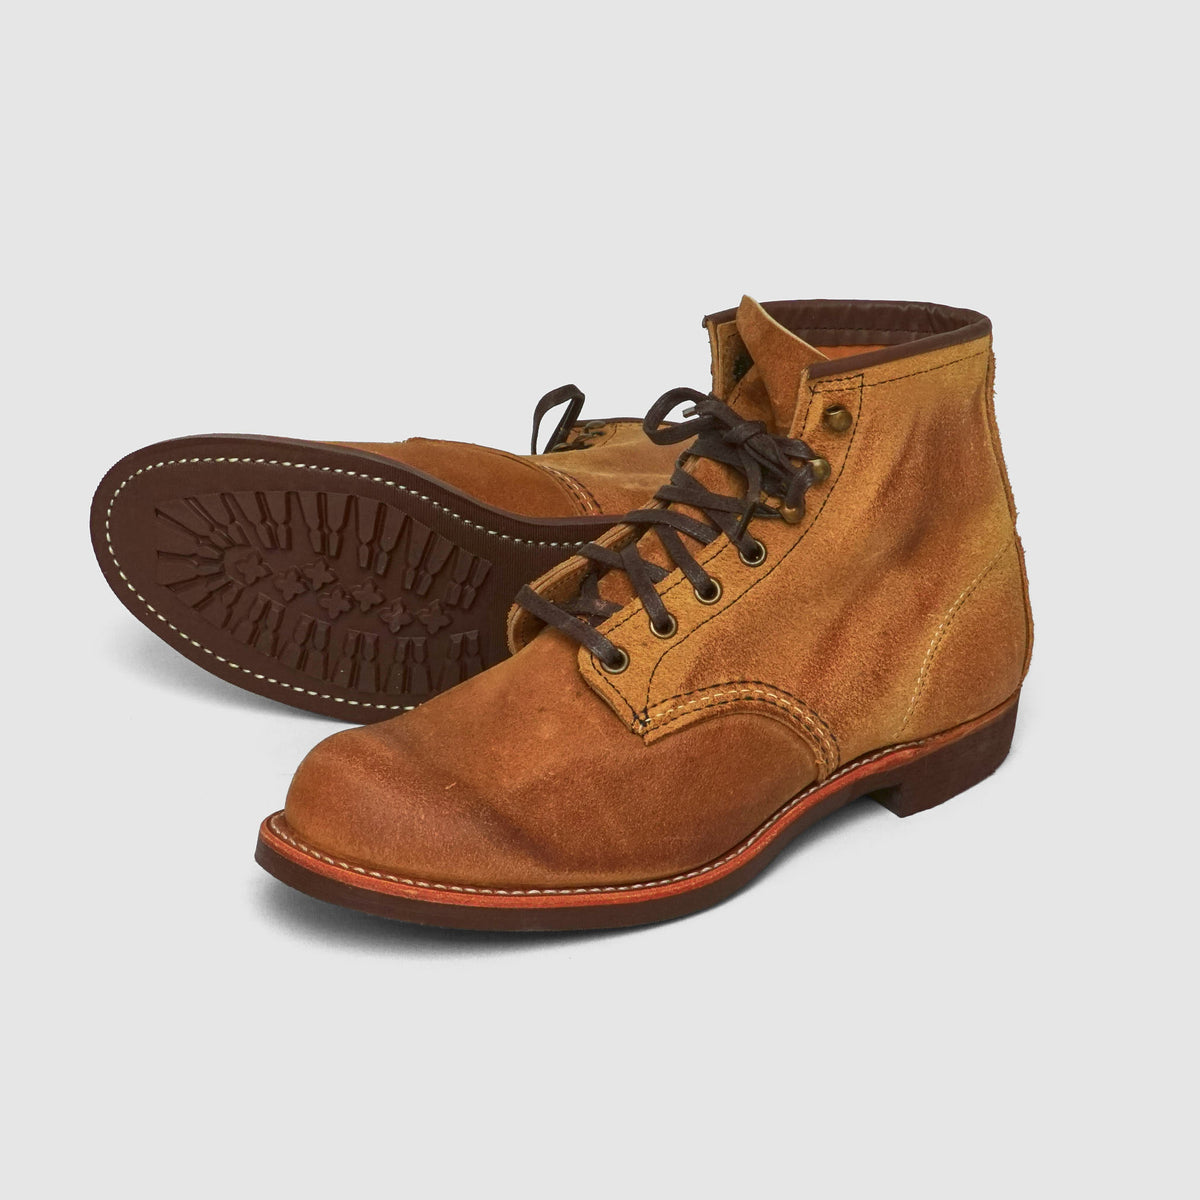 Red Wing Heritage Shoes Blacksmith, Suede 3344